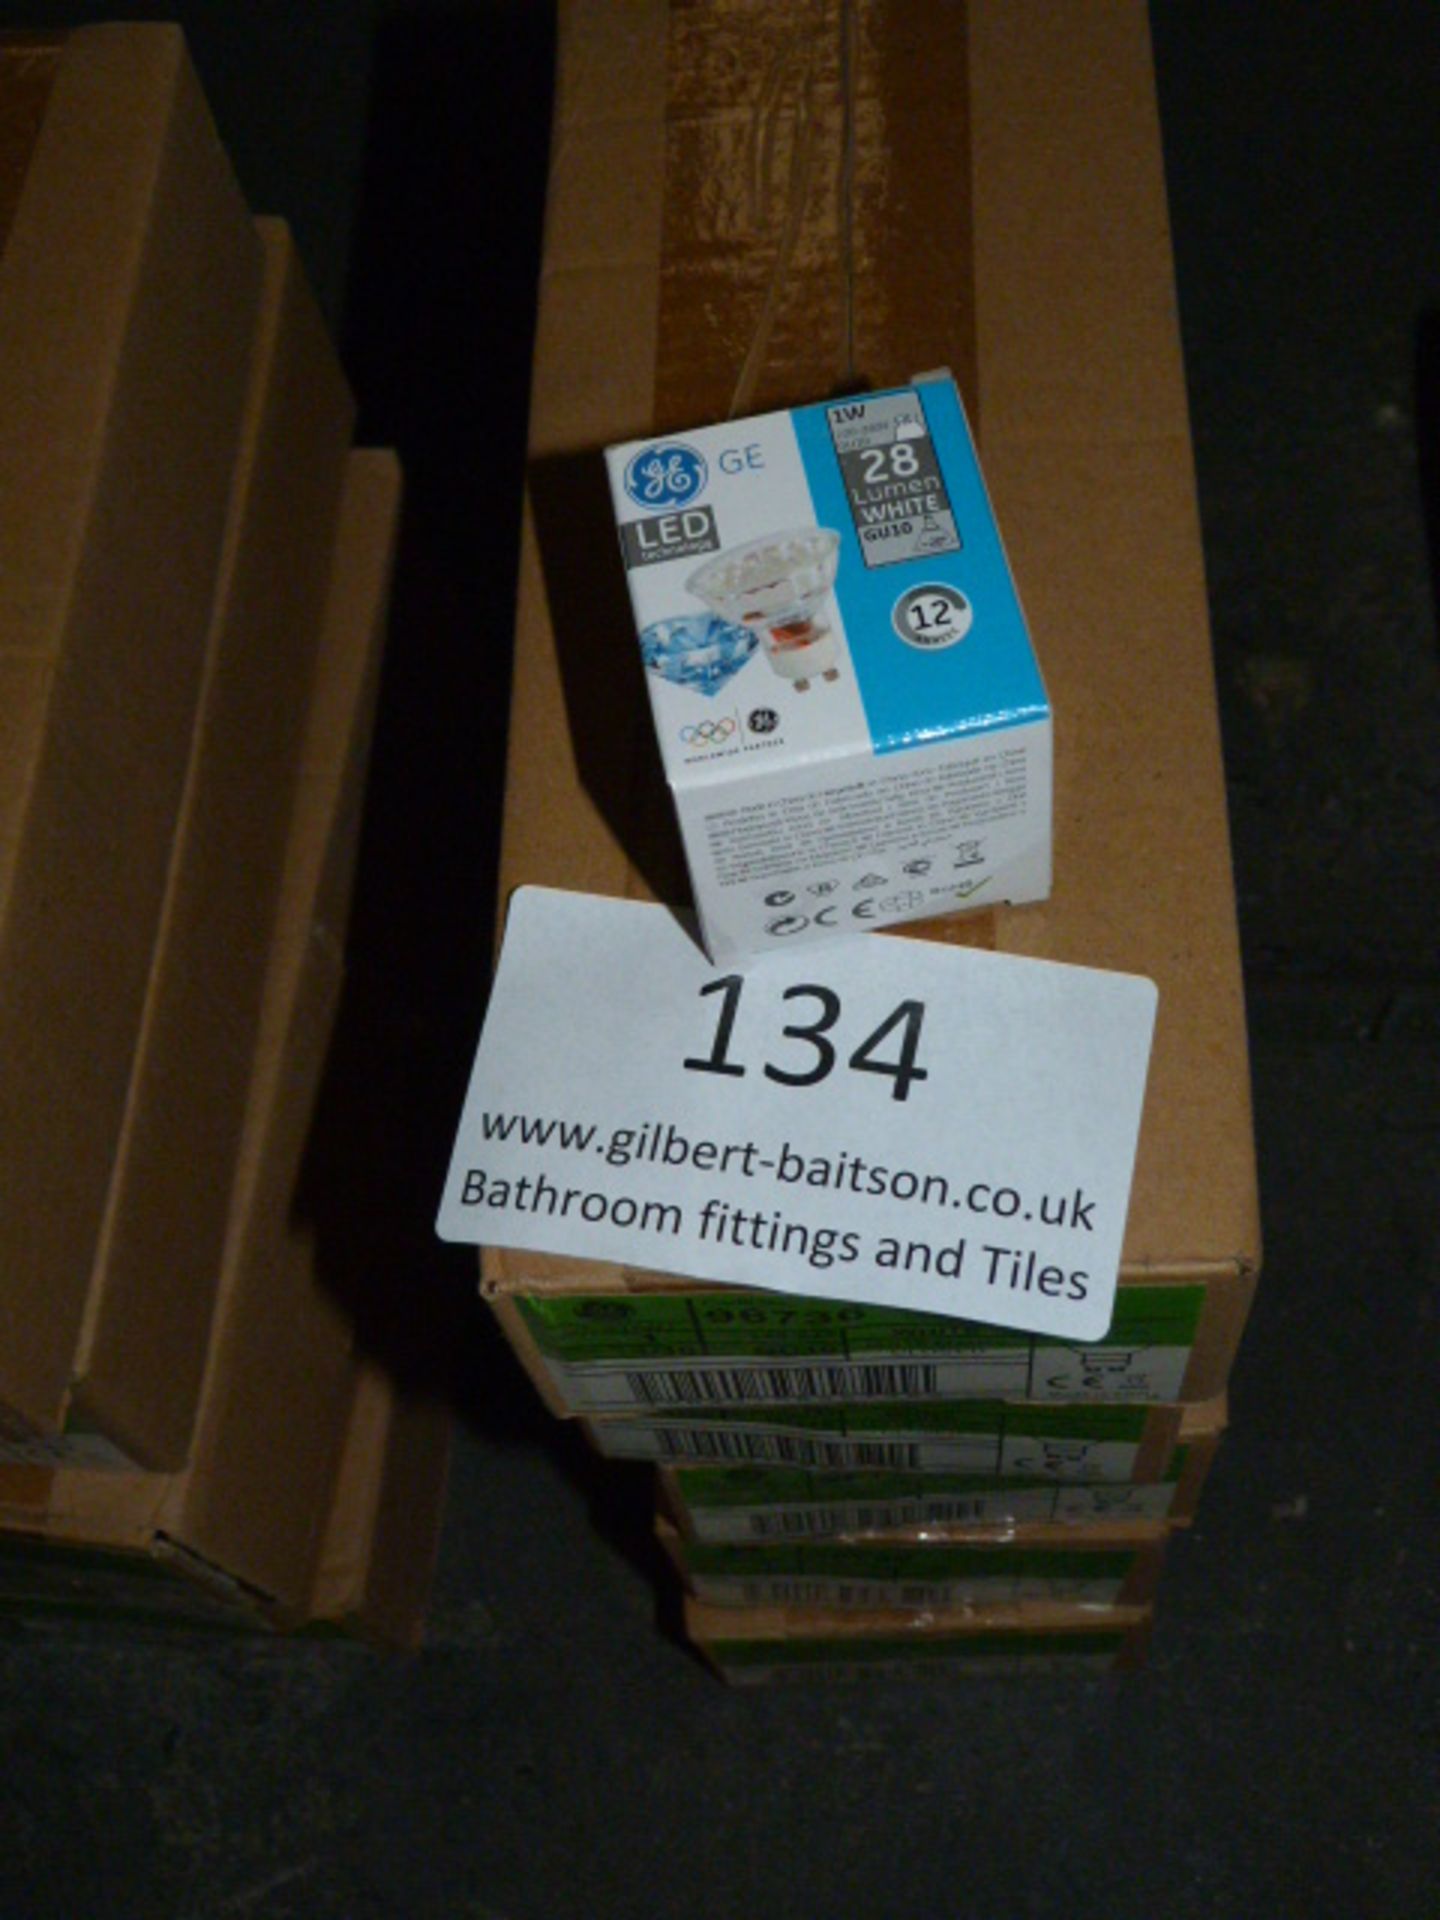 *5 Boxes Containing 10 GU10 LED 1W Lamps